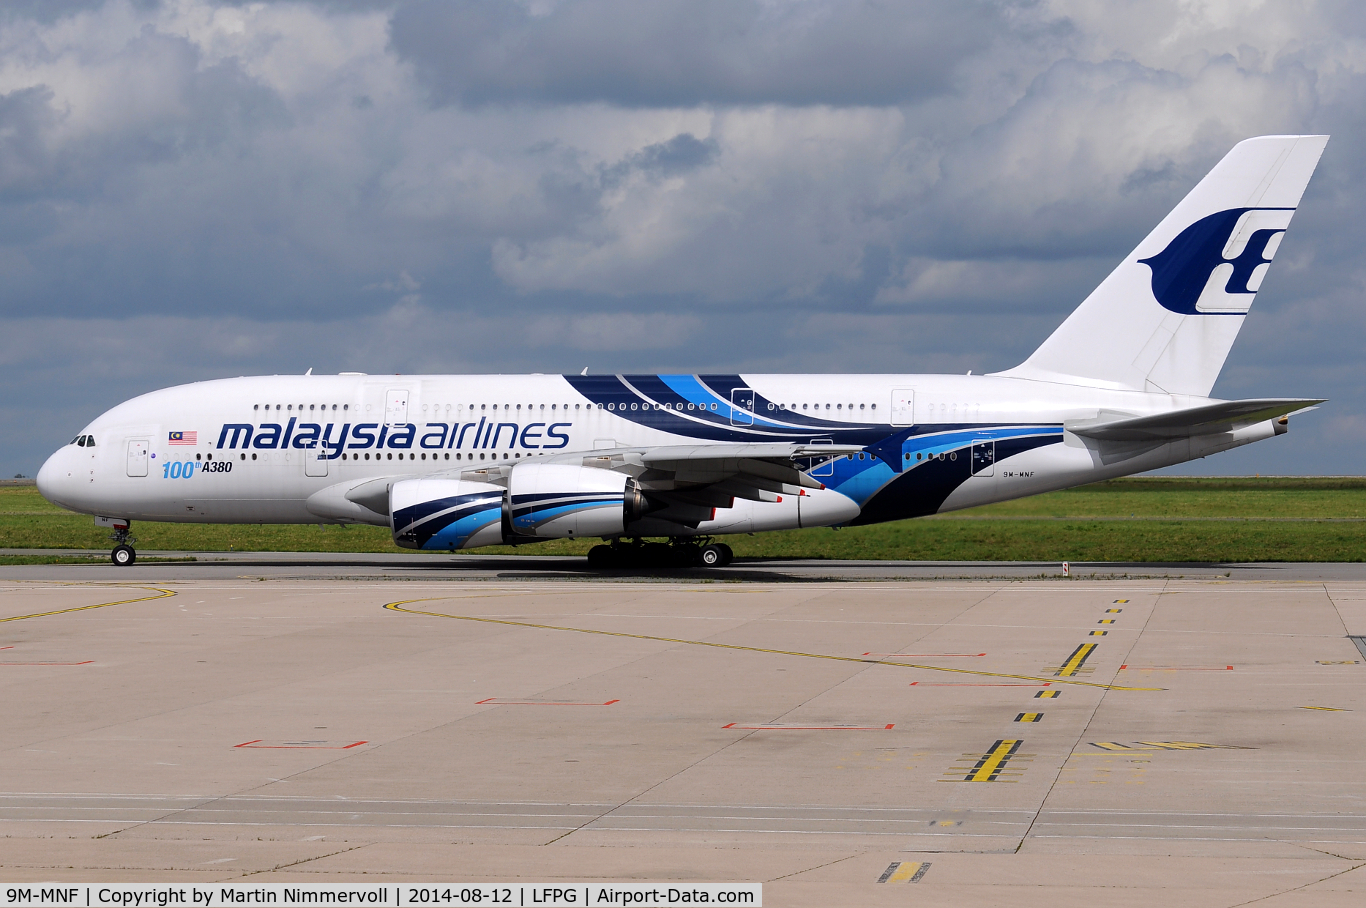 9M-MNF, 2012 Airbus A380-841 C/N 114, Malaysia Airlines